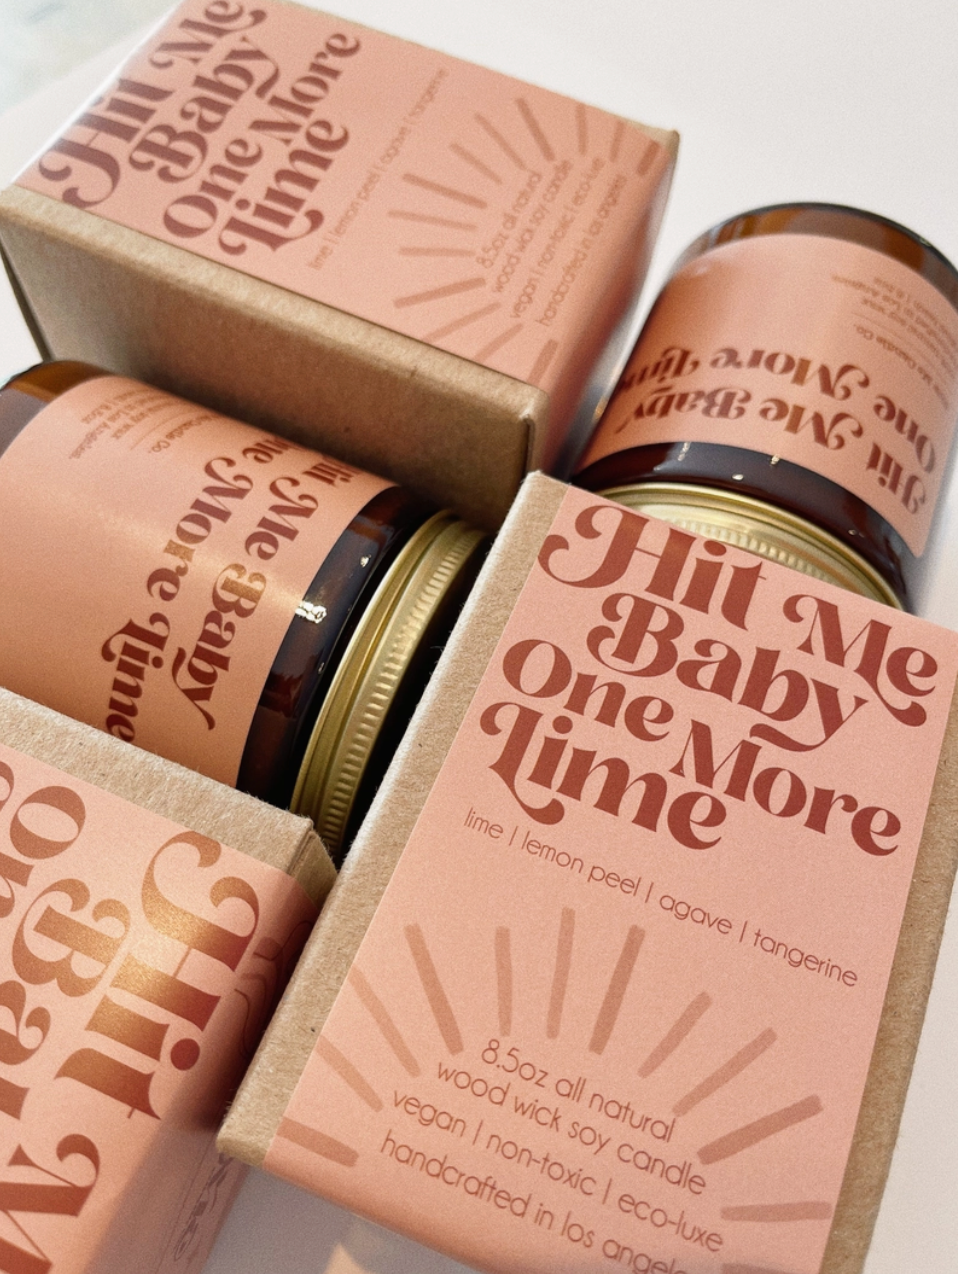 Hit Me Baby One More Lime Candle - Clothe Boutique